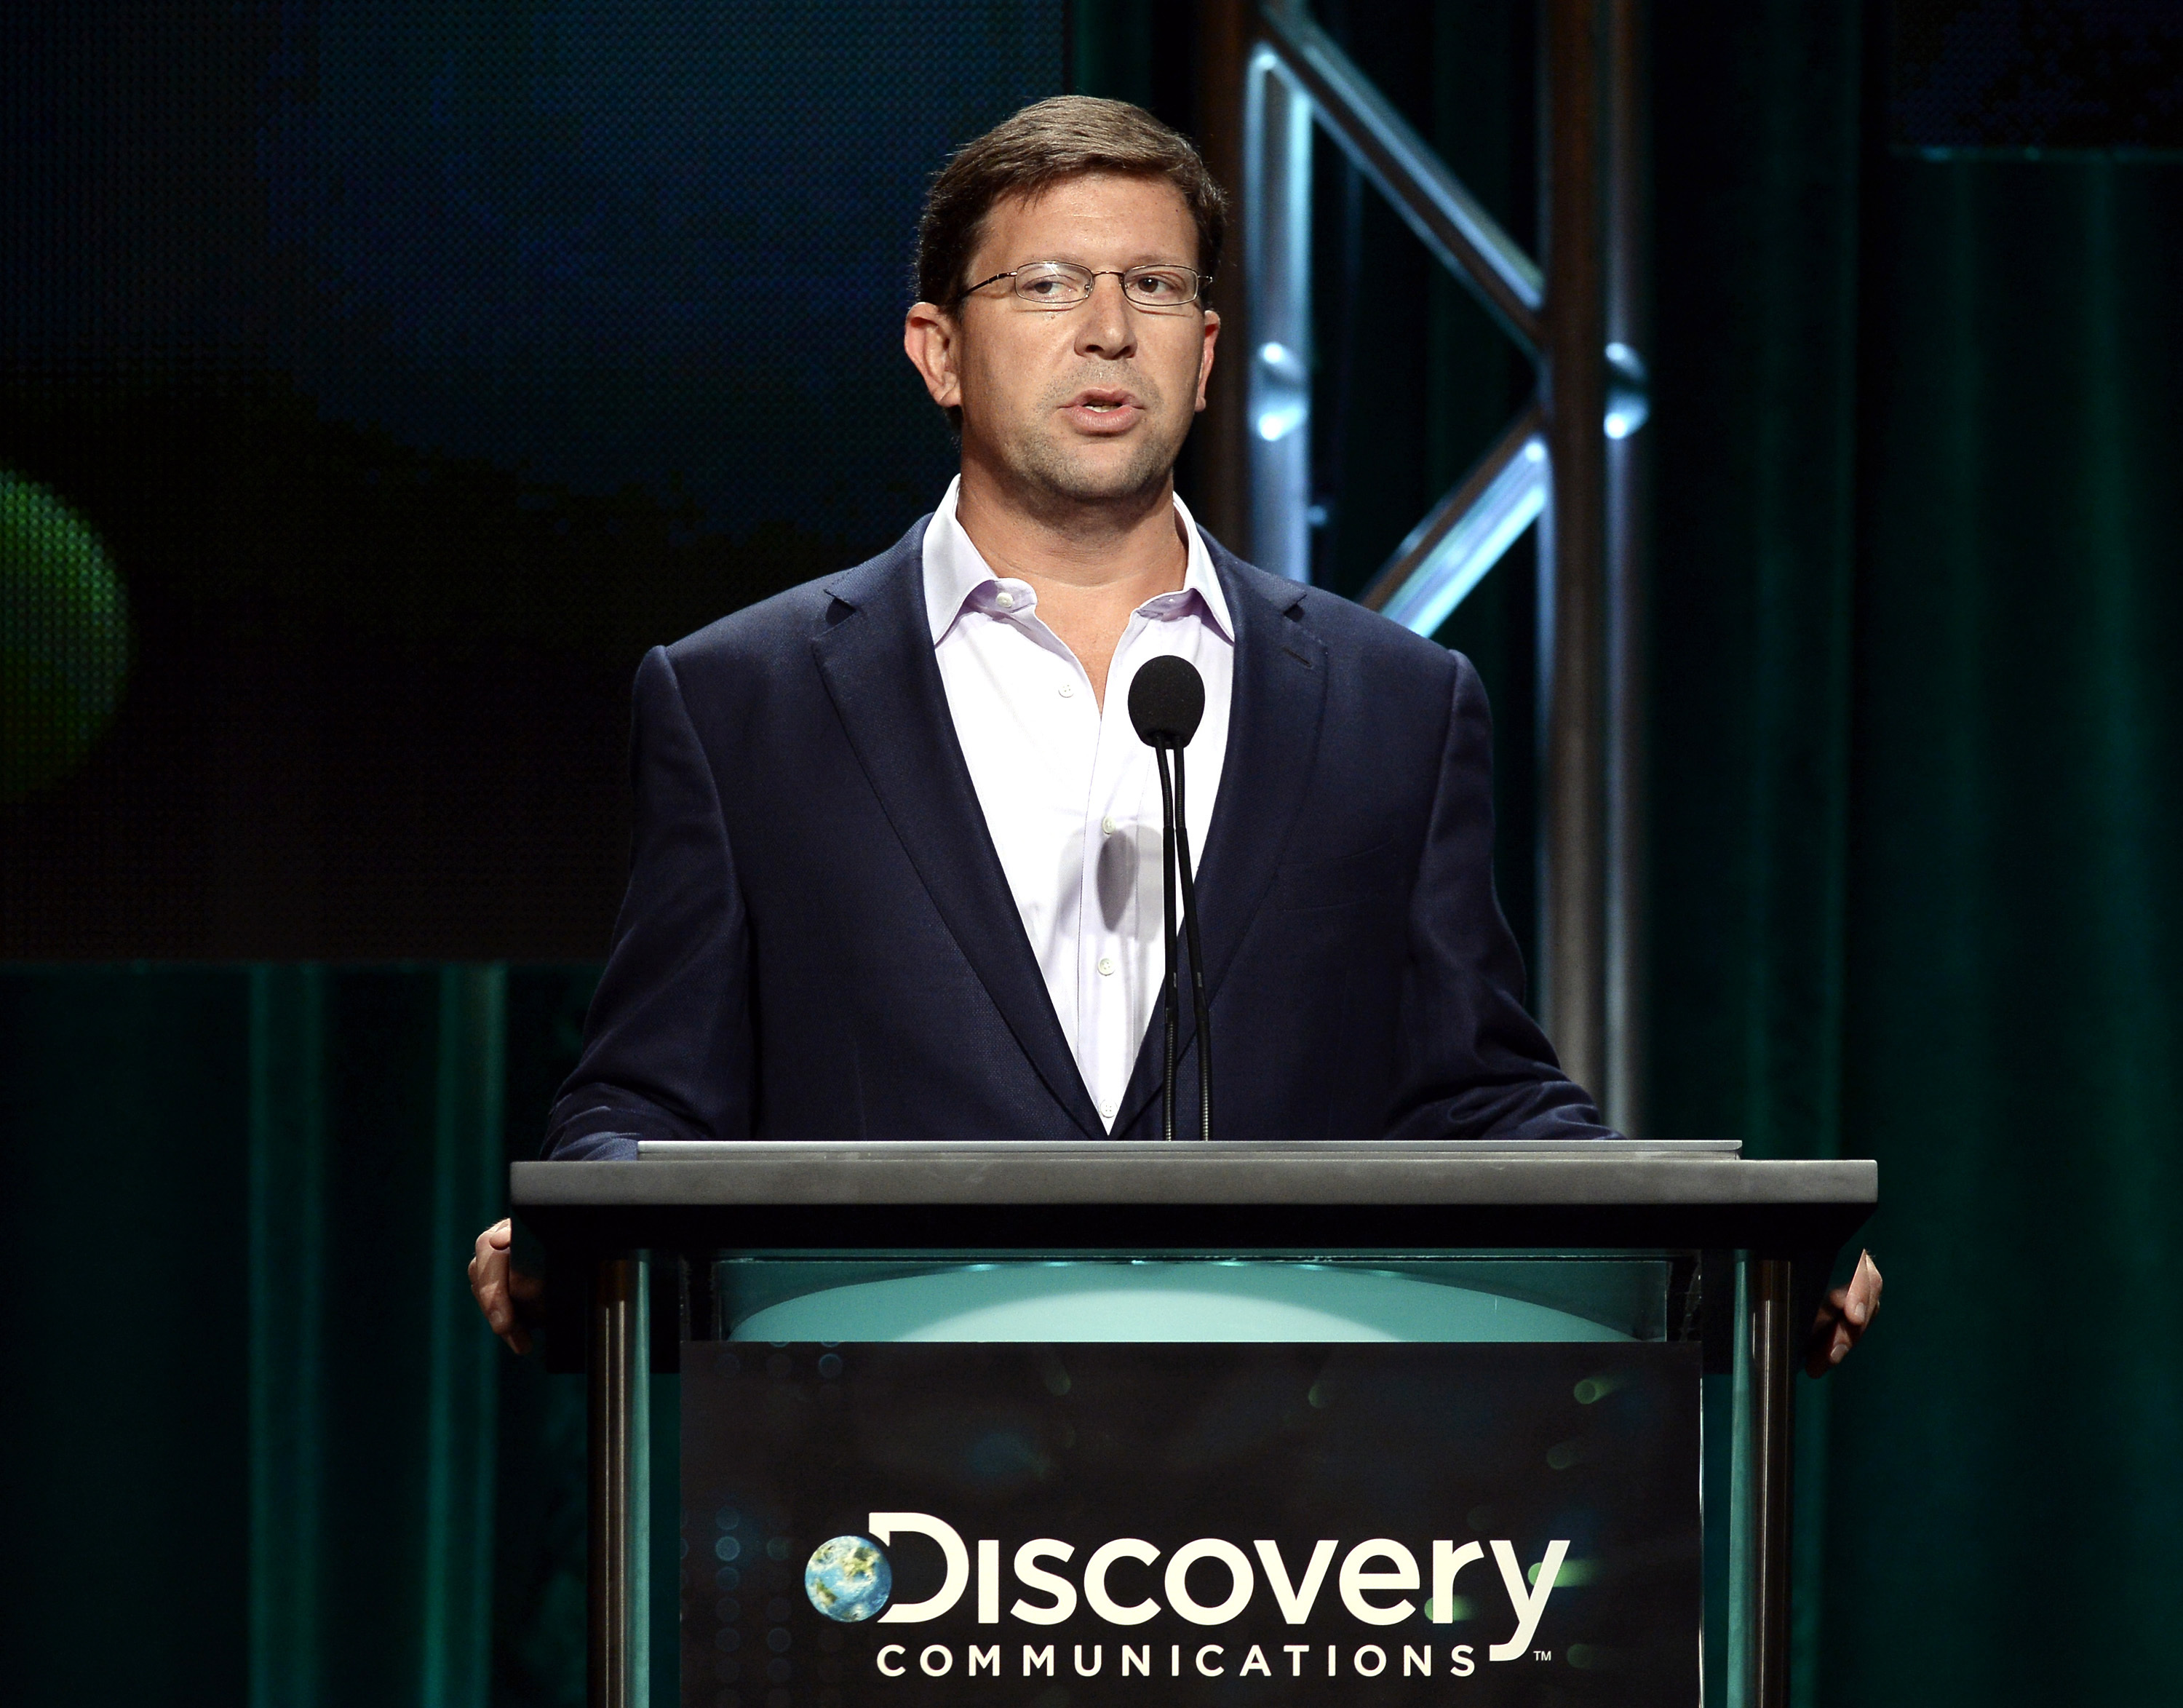 Leavy ,Chief Communications Officer and SEVP-Corporate Marketing & Affairs at Discovery Communications, Inc., speaks during Discovery Communications portion of the 2014 Television Critics Association Cable Summer Press Tour in Beverly Hills